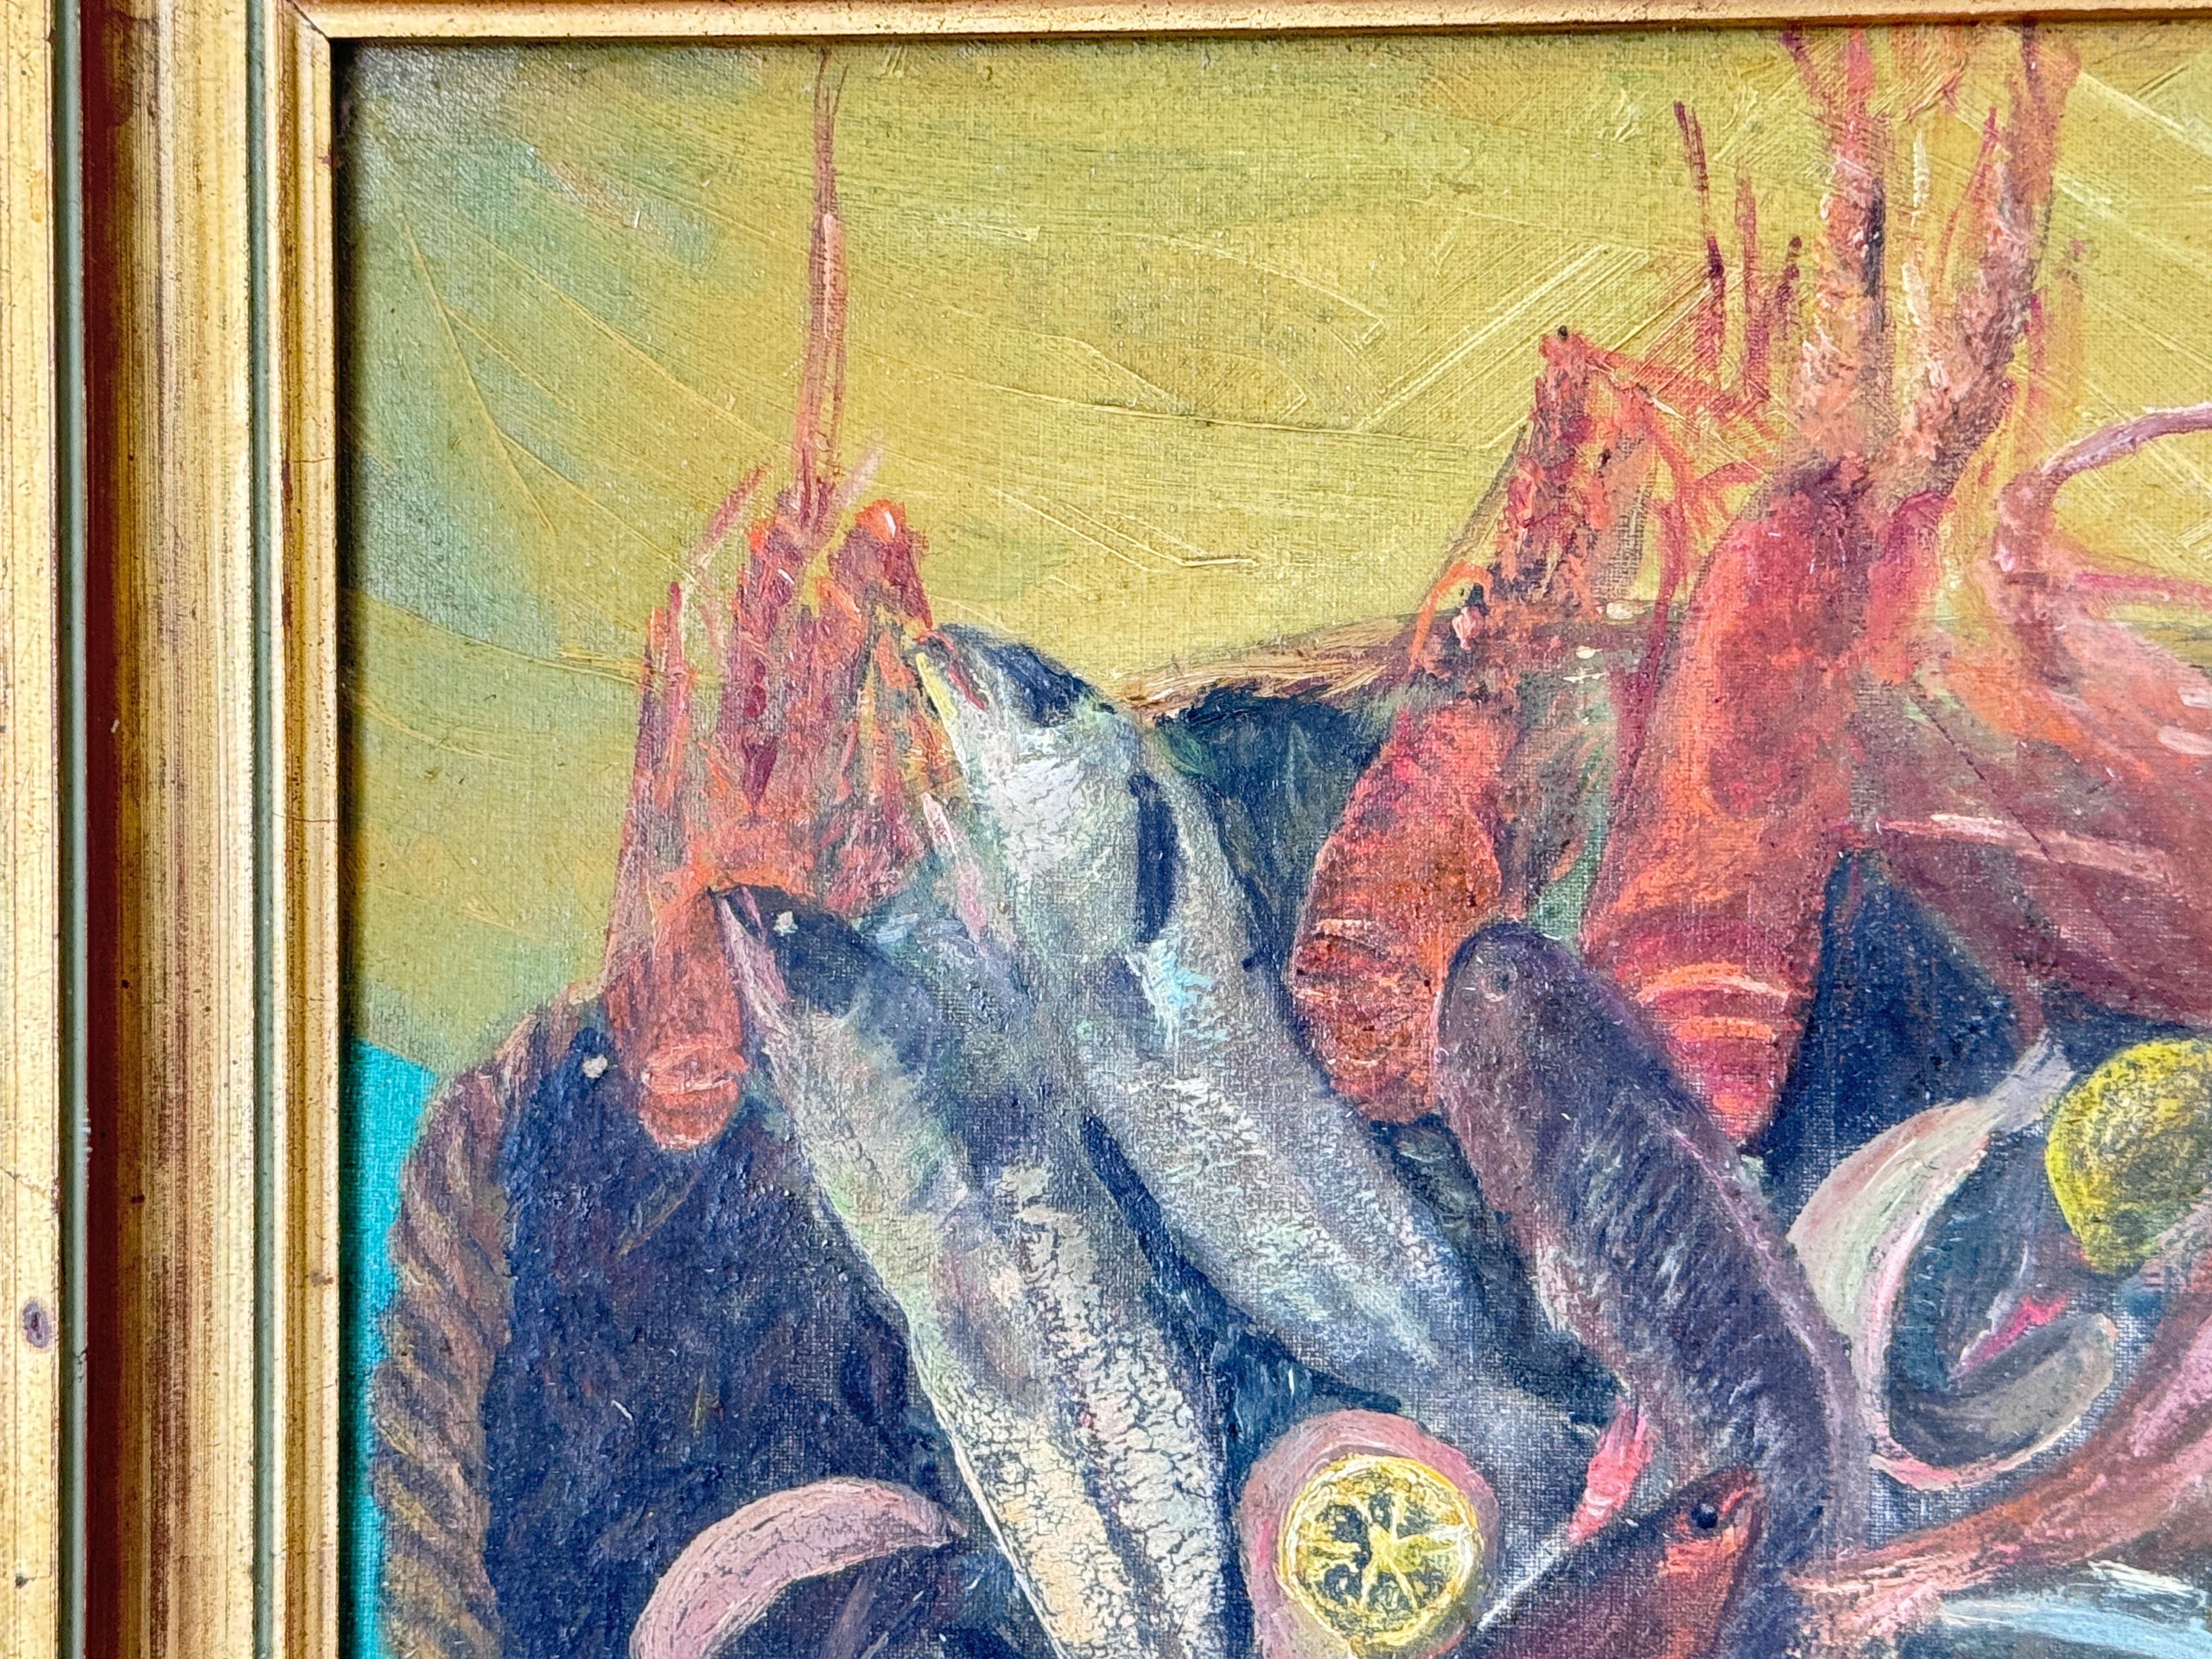 Oiled Original Oil Painting Representing Fishes Fance Early 20th Century For Sale